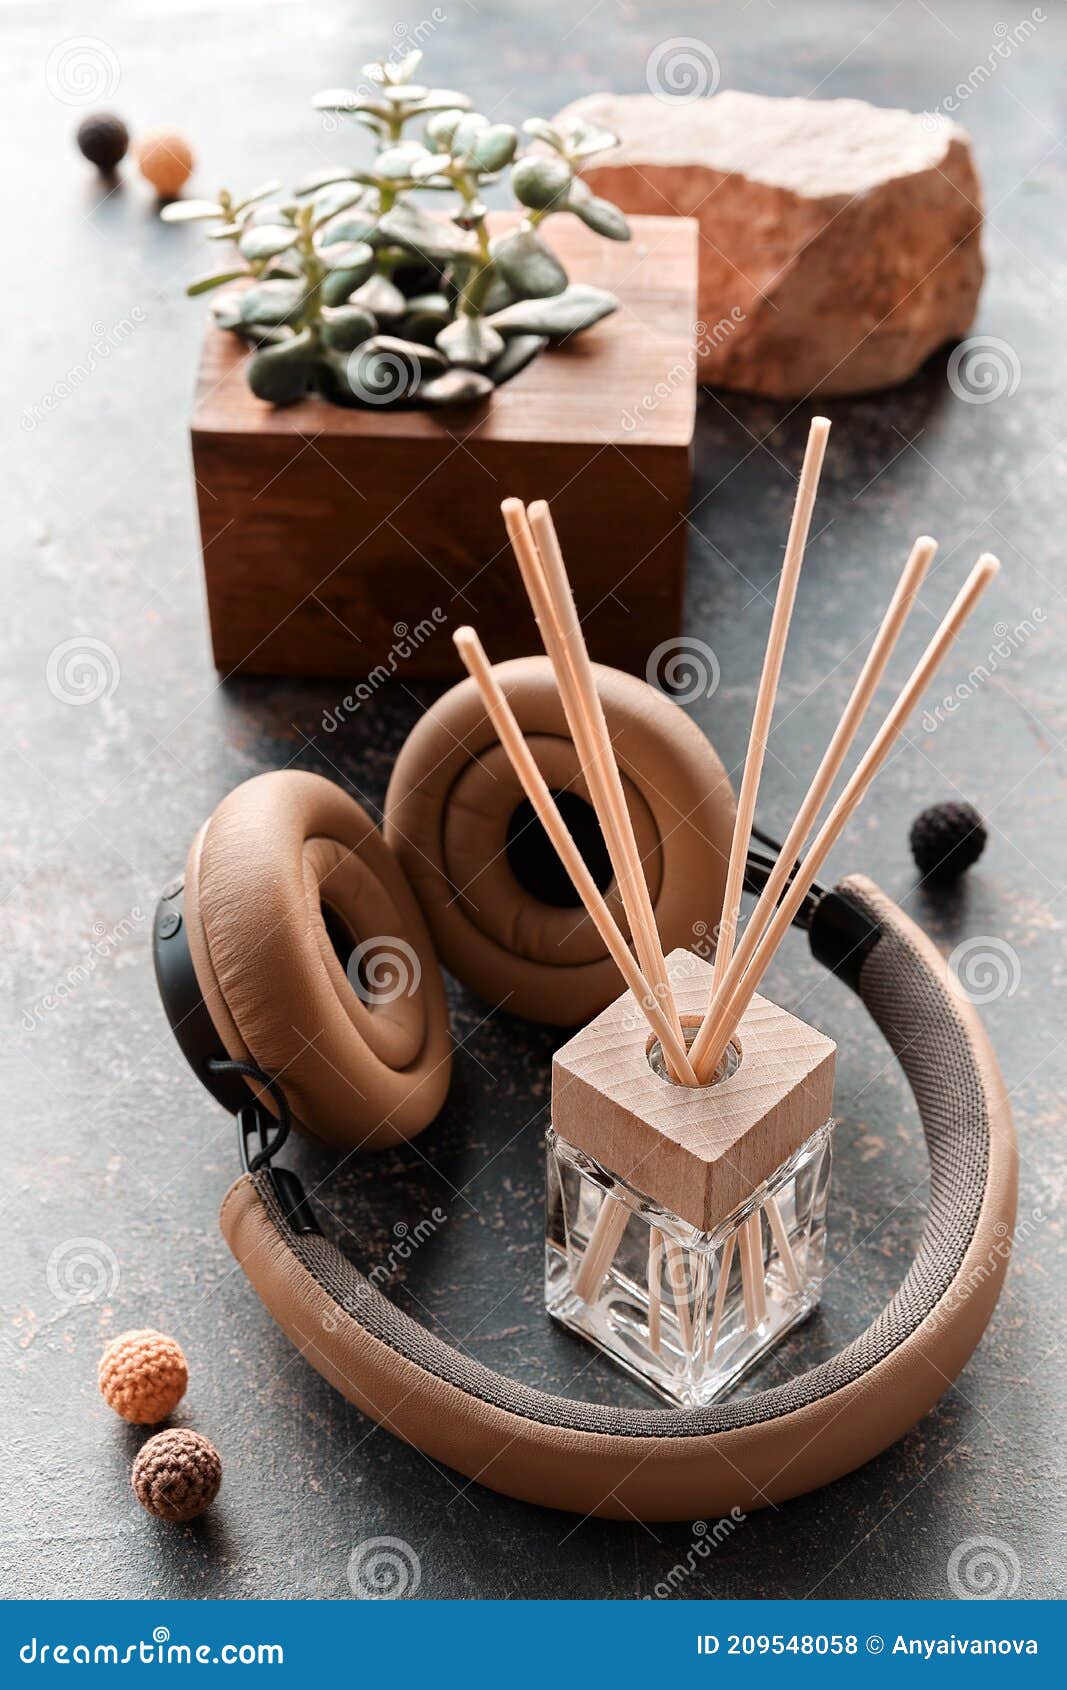 Musical Handcrafted Essential Oil Diffuser